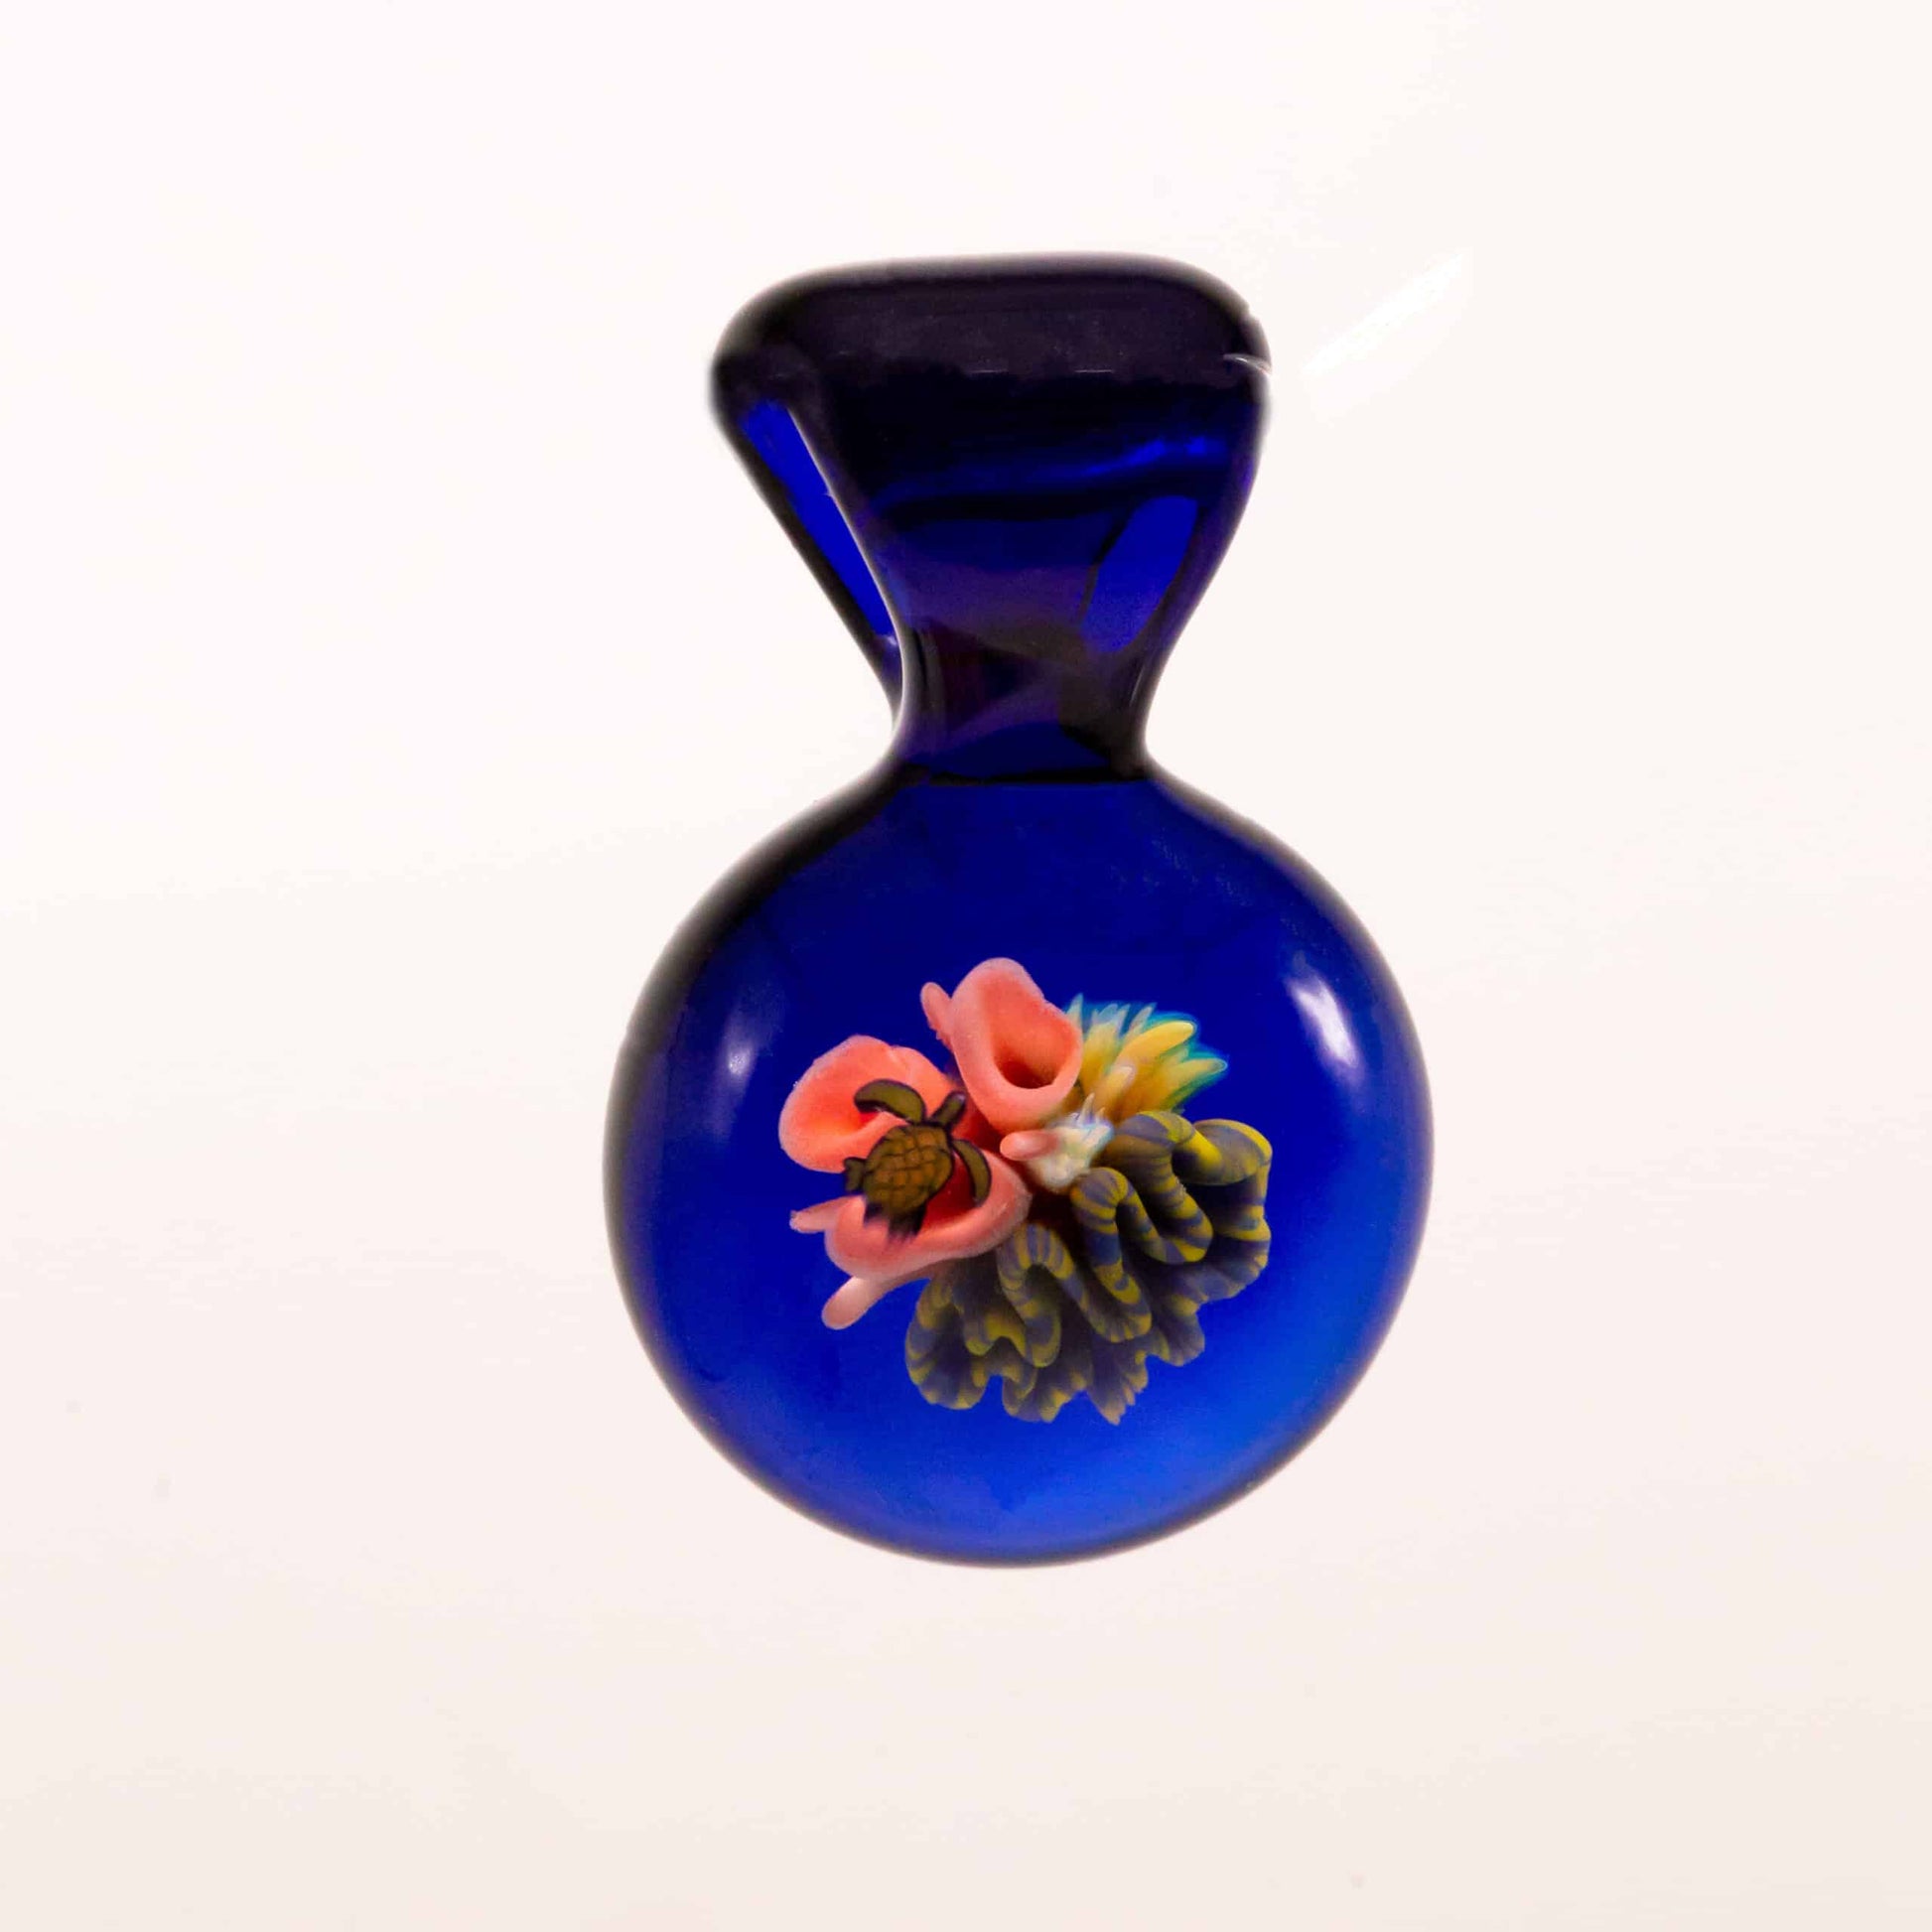 meticulously crafted glass pendant - Coral Reef Pendant (BLUE, SEA TURTLE) #4 BY KIMMO